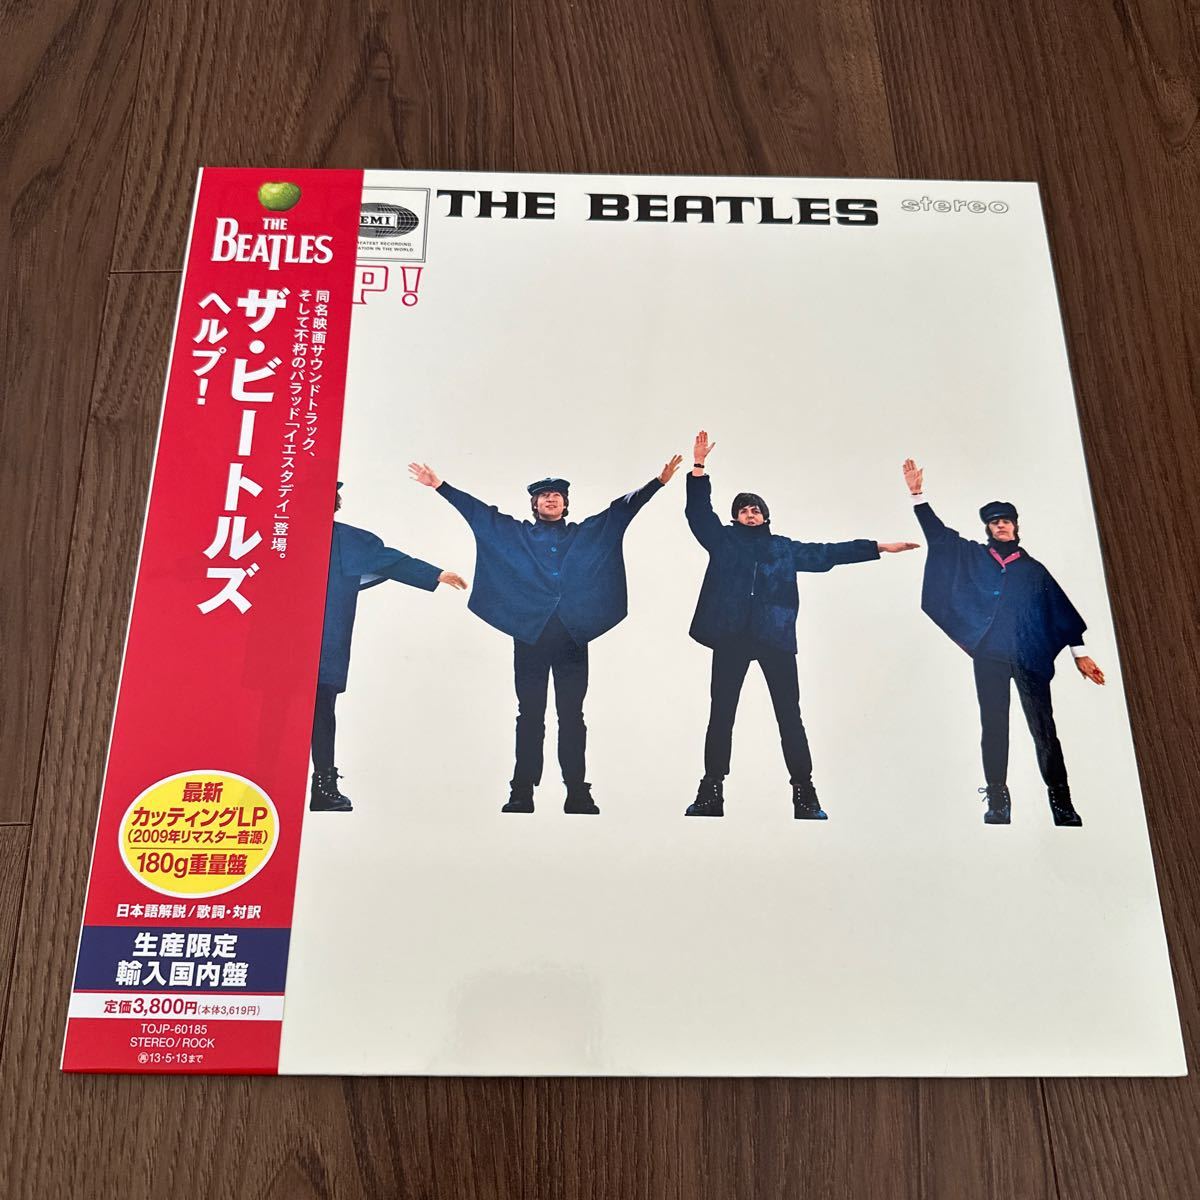  beautiful record rare 180g weight record with belt LP!! BEATLES Beatles HELP help four person is idol TOJP-60185 record western-style music John paul (pole) import domestic record 